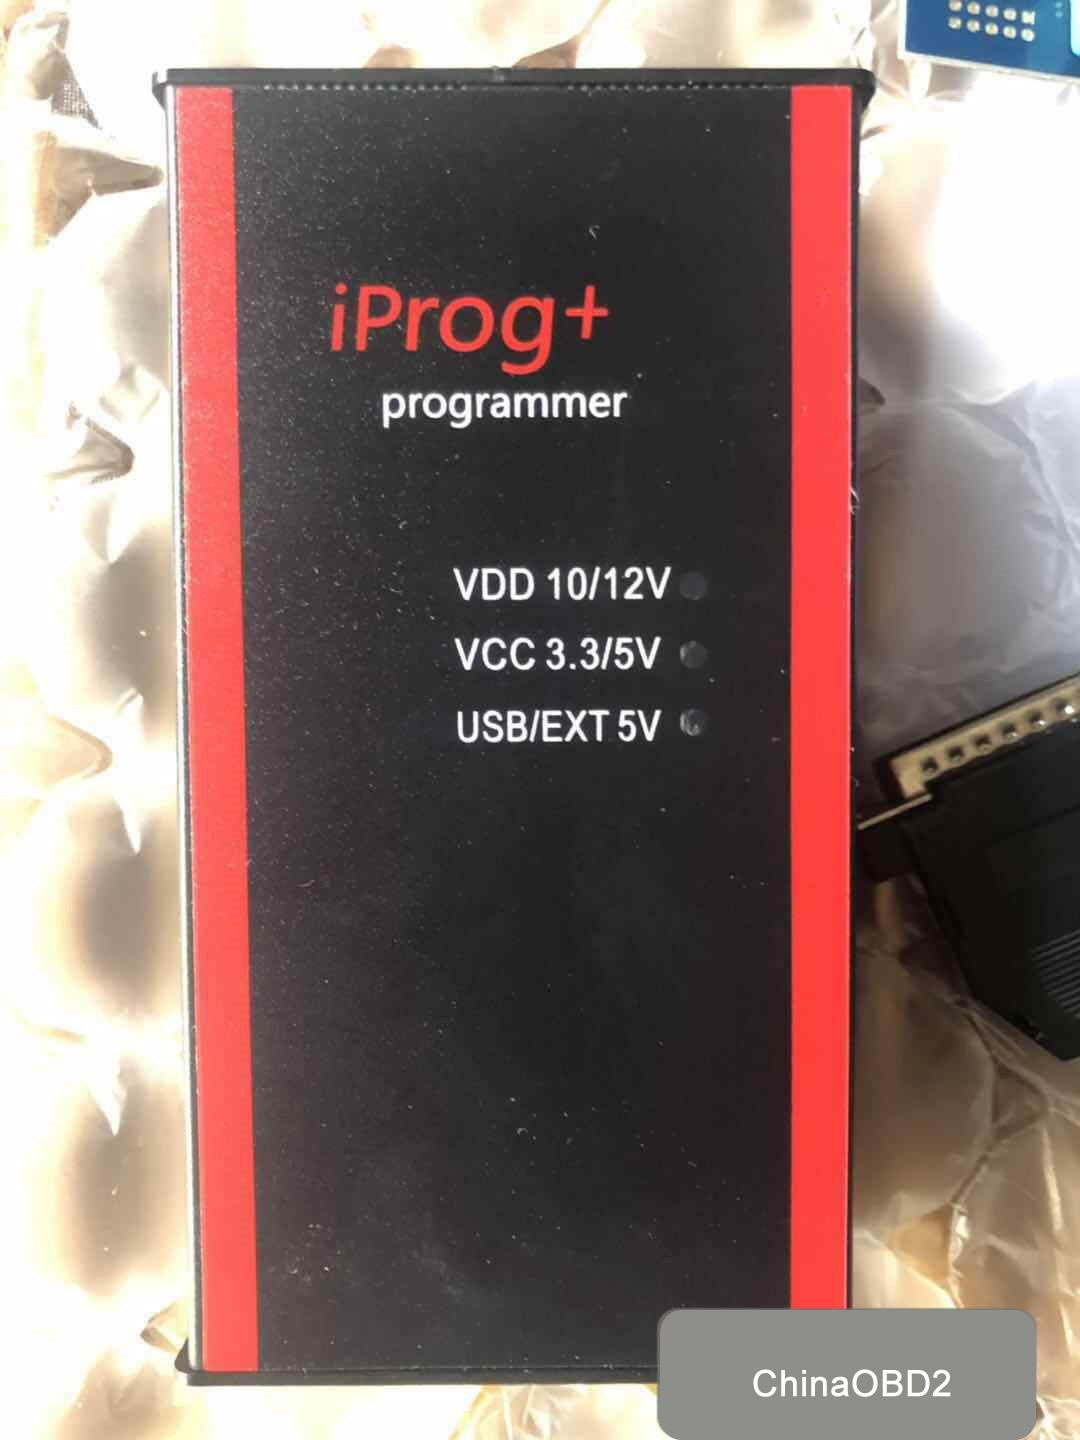 Confirmed! the iprog clone is verified to work without any issue. Here is the iProg Pro 69 user manual, incl. software download, install, test report...all details can be found here.  iprog pro price: around 500 usd (iprog clone)  iprog+ software download: https://www.chinaobd2.com/wholesale/iprog-programmer.html  iprog operating system: Windows xp: tested 100% Windows vista Windows 7 Windows 8  iprog version 69 install:  open computer, then the disk with iprog software extract iprog full.zip to the local disk c: go to disk c:/iprog+ 2018 0001 send iprogpro69 app to the desktop iprog install 1 install software for iprog universal programmer 2-5 setup ports: com4 in the computer management 6 run iprog application on the desktop iprog version: 69 https://www.chinaobd2.com/wholesale/iprog-programmer.html iprog language 7 iprog for adapter tests 8 iprog airbag 9 10 iprog car 11 iprog odomerer dashboard 12-14 iprog eeprom 15 16 read 96c46 17-19 iprog mcu 20 iprog other functions 21  iprog full functions: iprog function 1.Adapters test 1 2.Airbag reset 2-6 3.DPF OFF 7 4.EEPROM 8 5.IMMO 9 6.Key programmer 10 7.MCU 11 8.Mileage correction 12 9.PIN ABS  13  iprog odometer test: Part 1: iProg pro 69 odometer  Part 2: iProg 55 odometer  Part 1: iProg pro 69 odometer   go to iprog pro 69- dashboard iprog odometer 1 select Toyota - rav4 denso 93c45 2 3 iprog clone read out the old km: 54646320 4 write new km: 546 5 6 again read odometer to confirm the new km 7 iprog pro 69 and dashboard 93c45 connection 8 9 odometer correction done!  open iprog pro 69 shortcut find target.. send iprog 55 and iprog+ programmer eeprom group to desktop 10  Part 2: iProg 55 odometer  run iprog 55 and read km from Toyota - rav4 denso 93c45 11 iprog 55 read out the km: 540 12 then write a new km: 5403210 13-16 iprog 55 and toyota 93c45 connection 17  success!   iprog clone of high quality: ：iprog clone source: http://www.cardiagtool.co.uk/iprog-odometer-correction-scanner.html